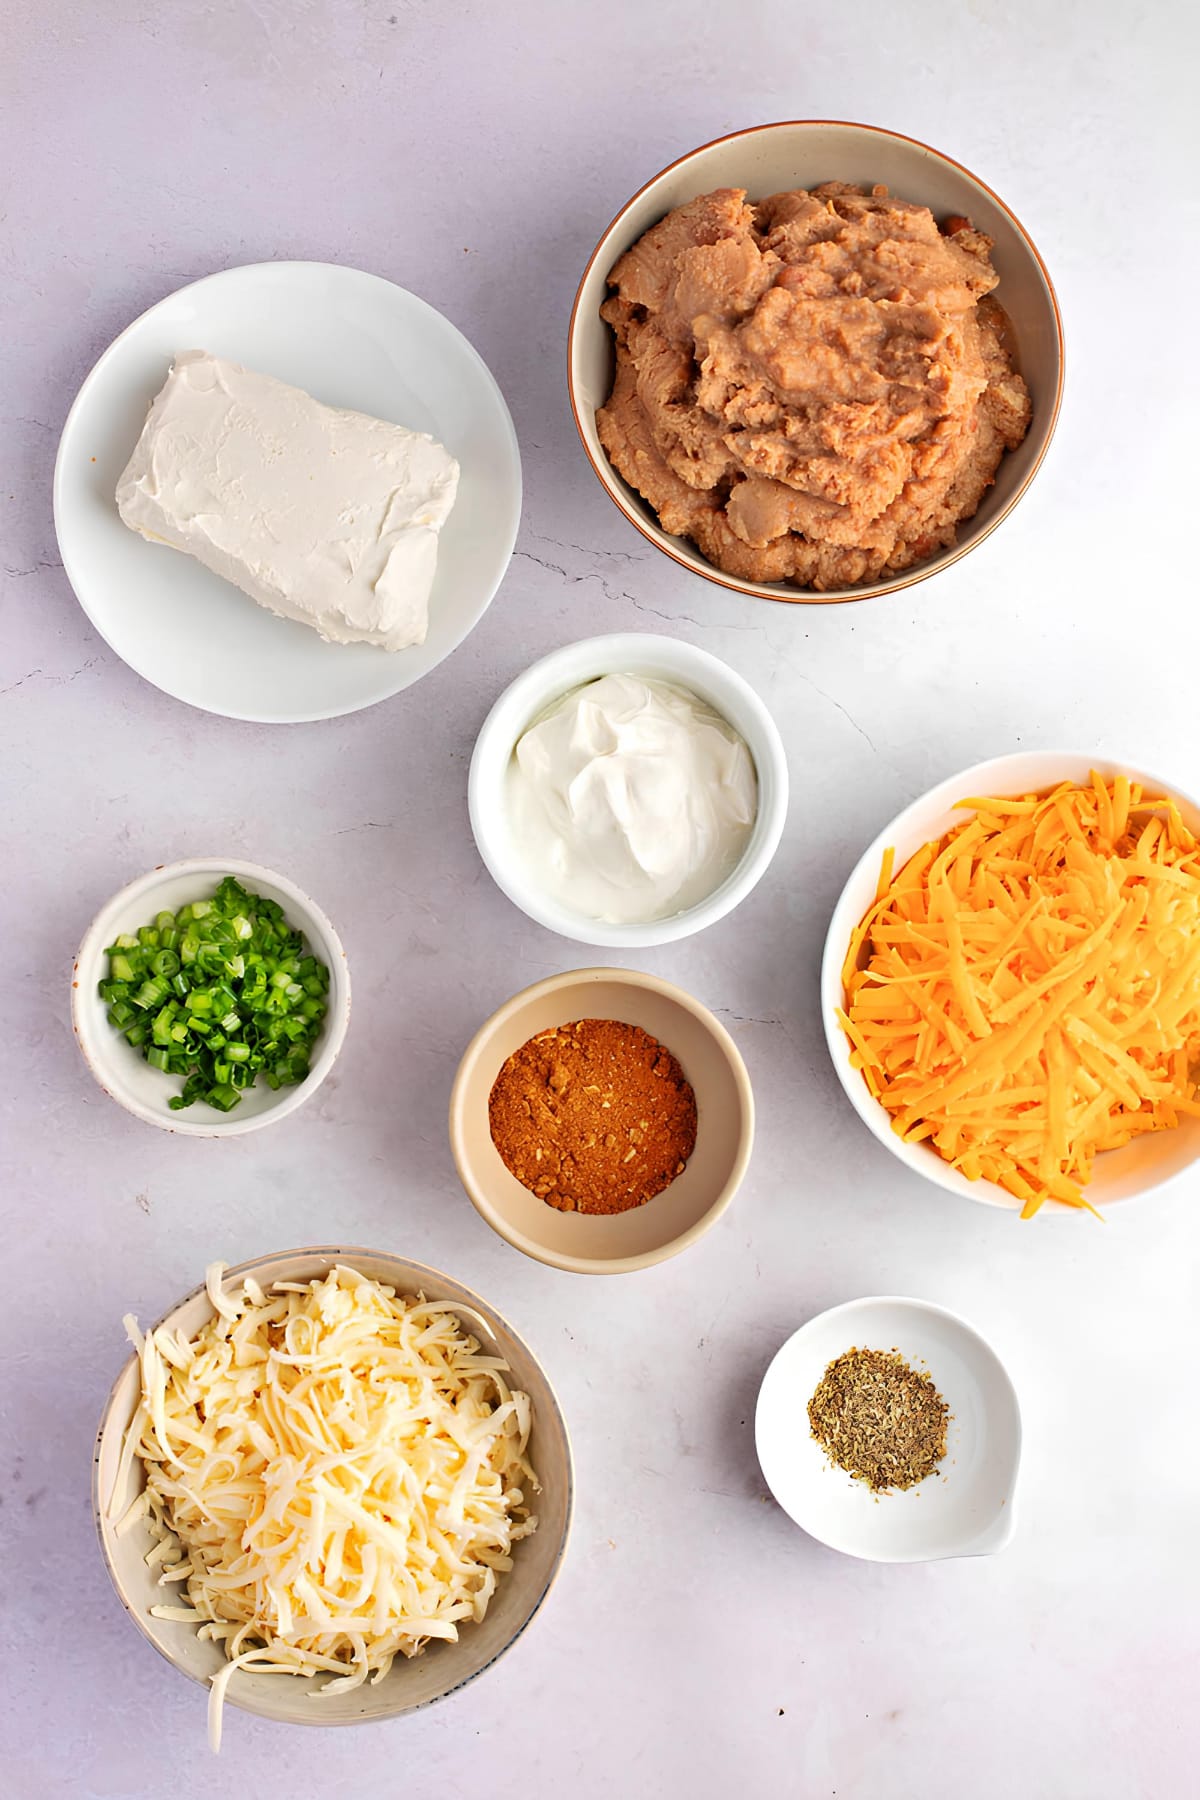 Hot Bean Dip Ingredients - Cream Cheese, Sour Cream, Refried Beans, Onions, Taco Seasoning, Salsa and Hot Pepper Sauce